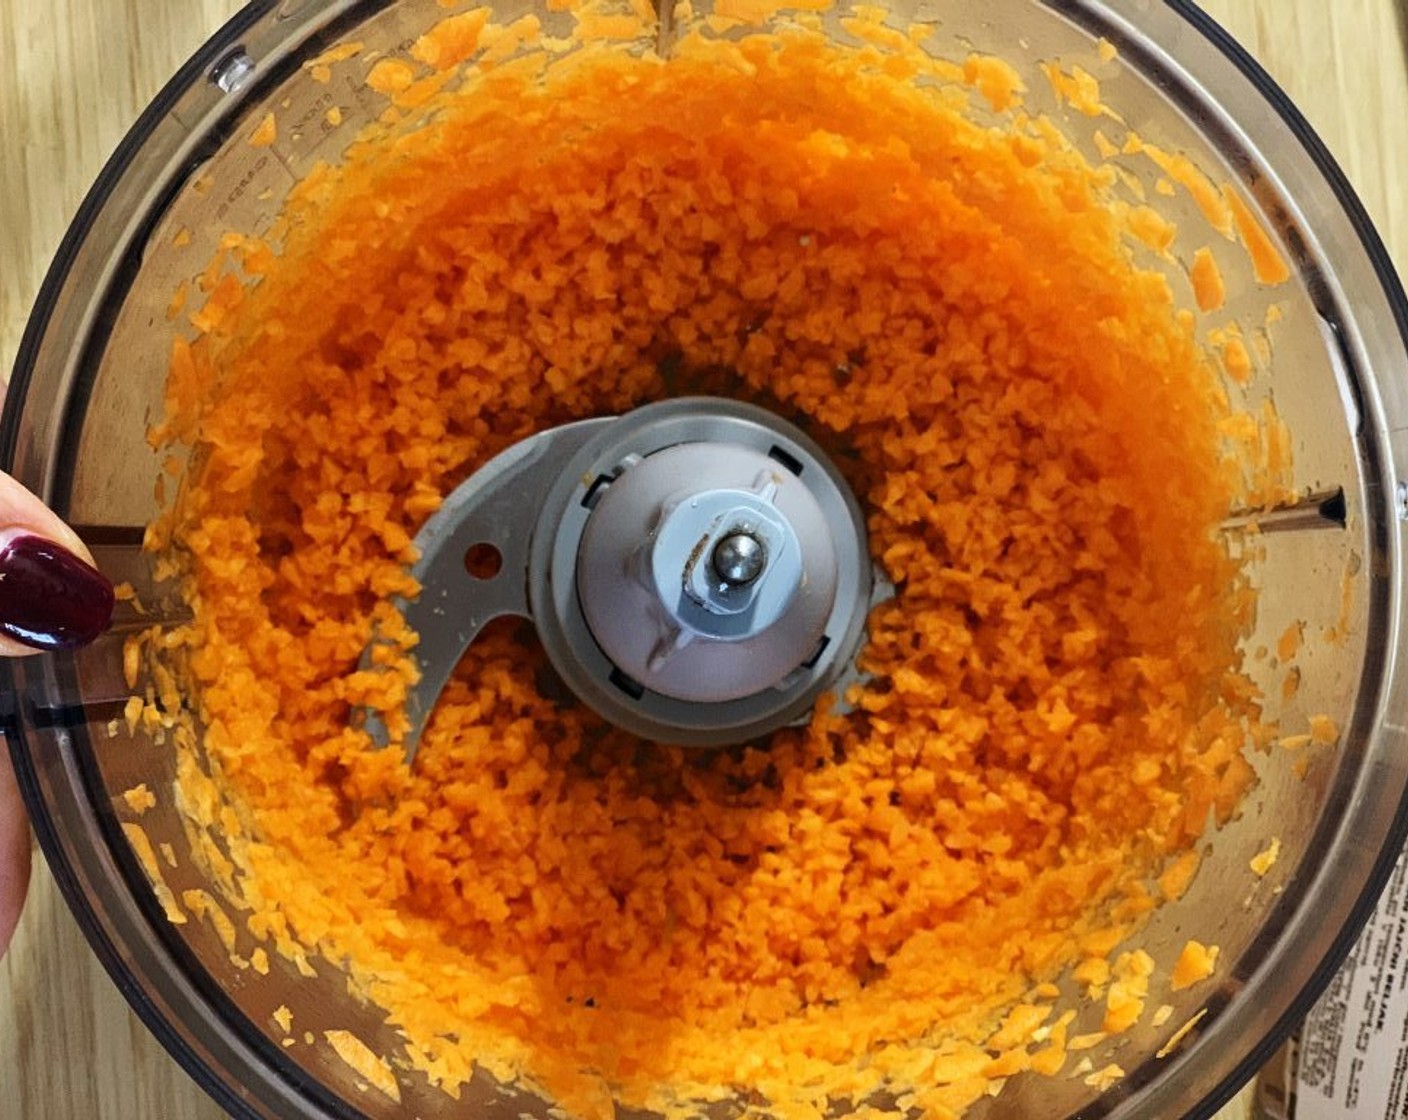 step 1 Wash and peel Carrot (1 cup) then pulse them in your food processor, if you don’t have one you can just finely grate them.